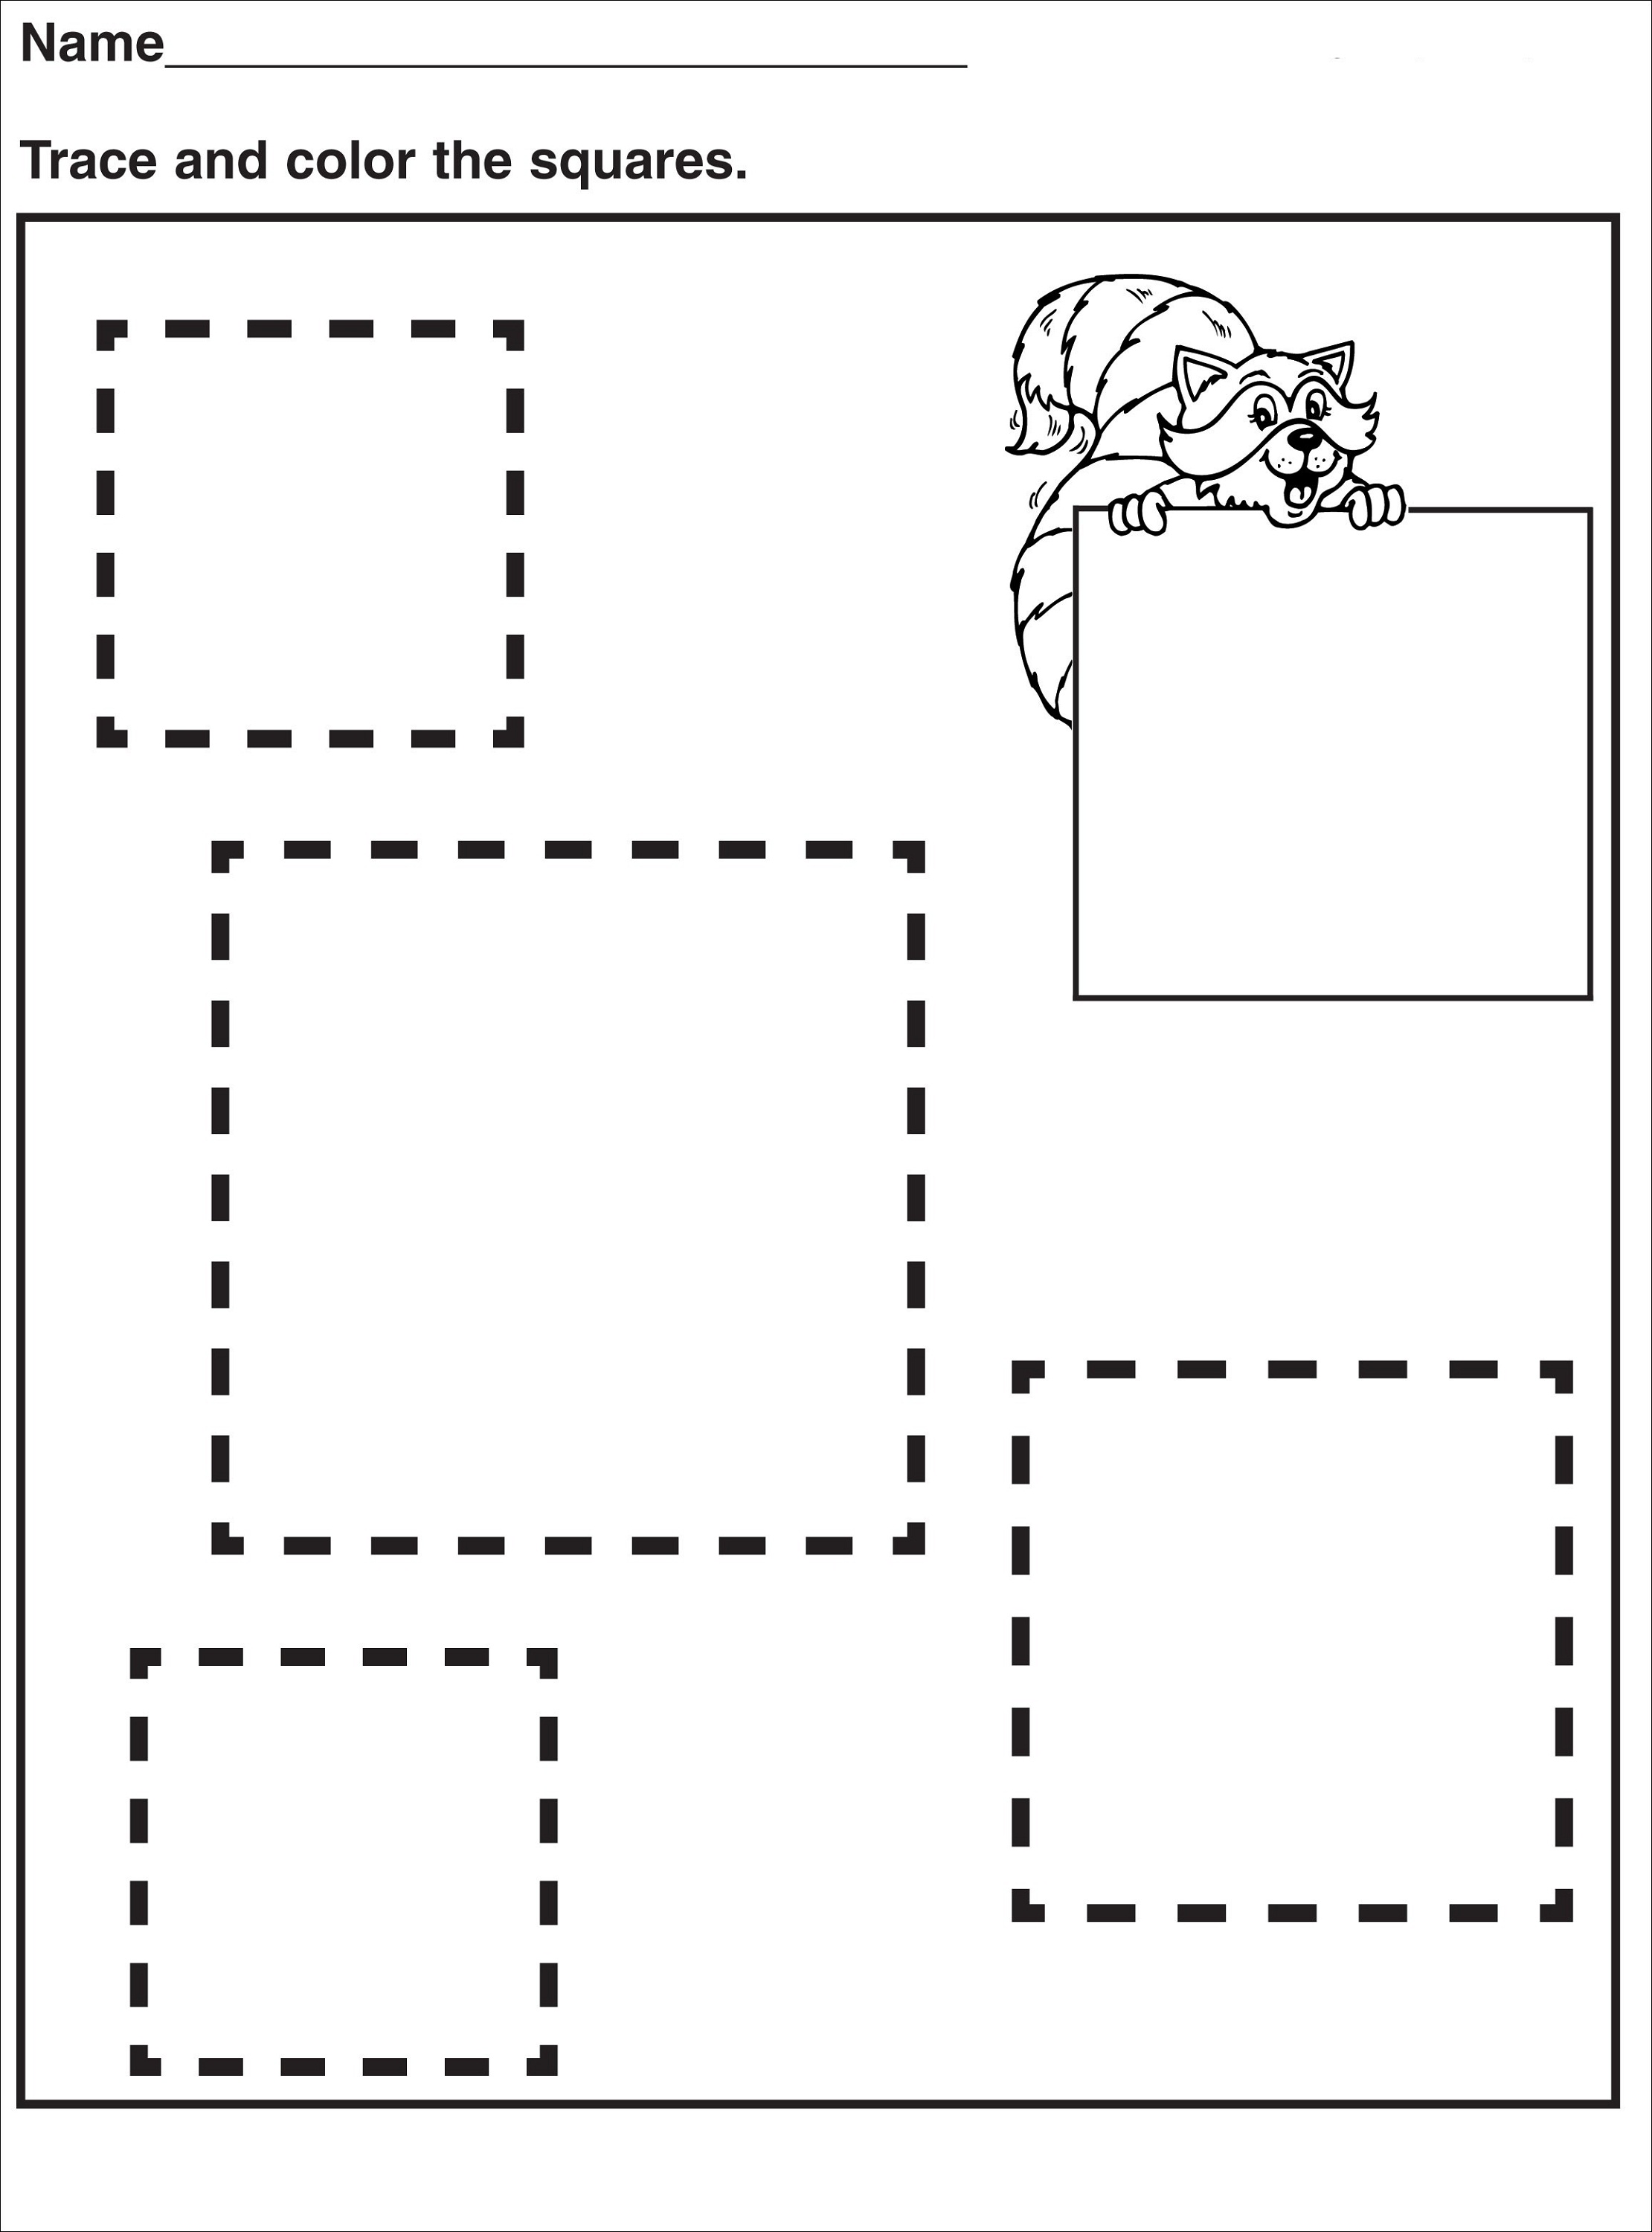 Tracing Pages for Preschool | Activity Shelter